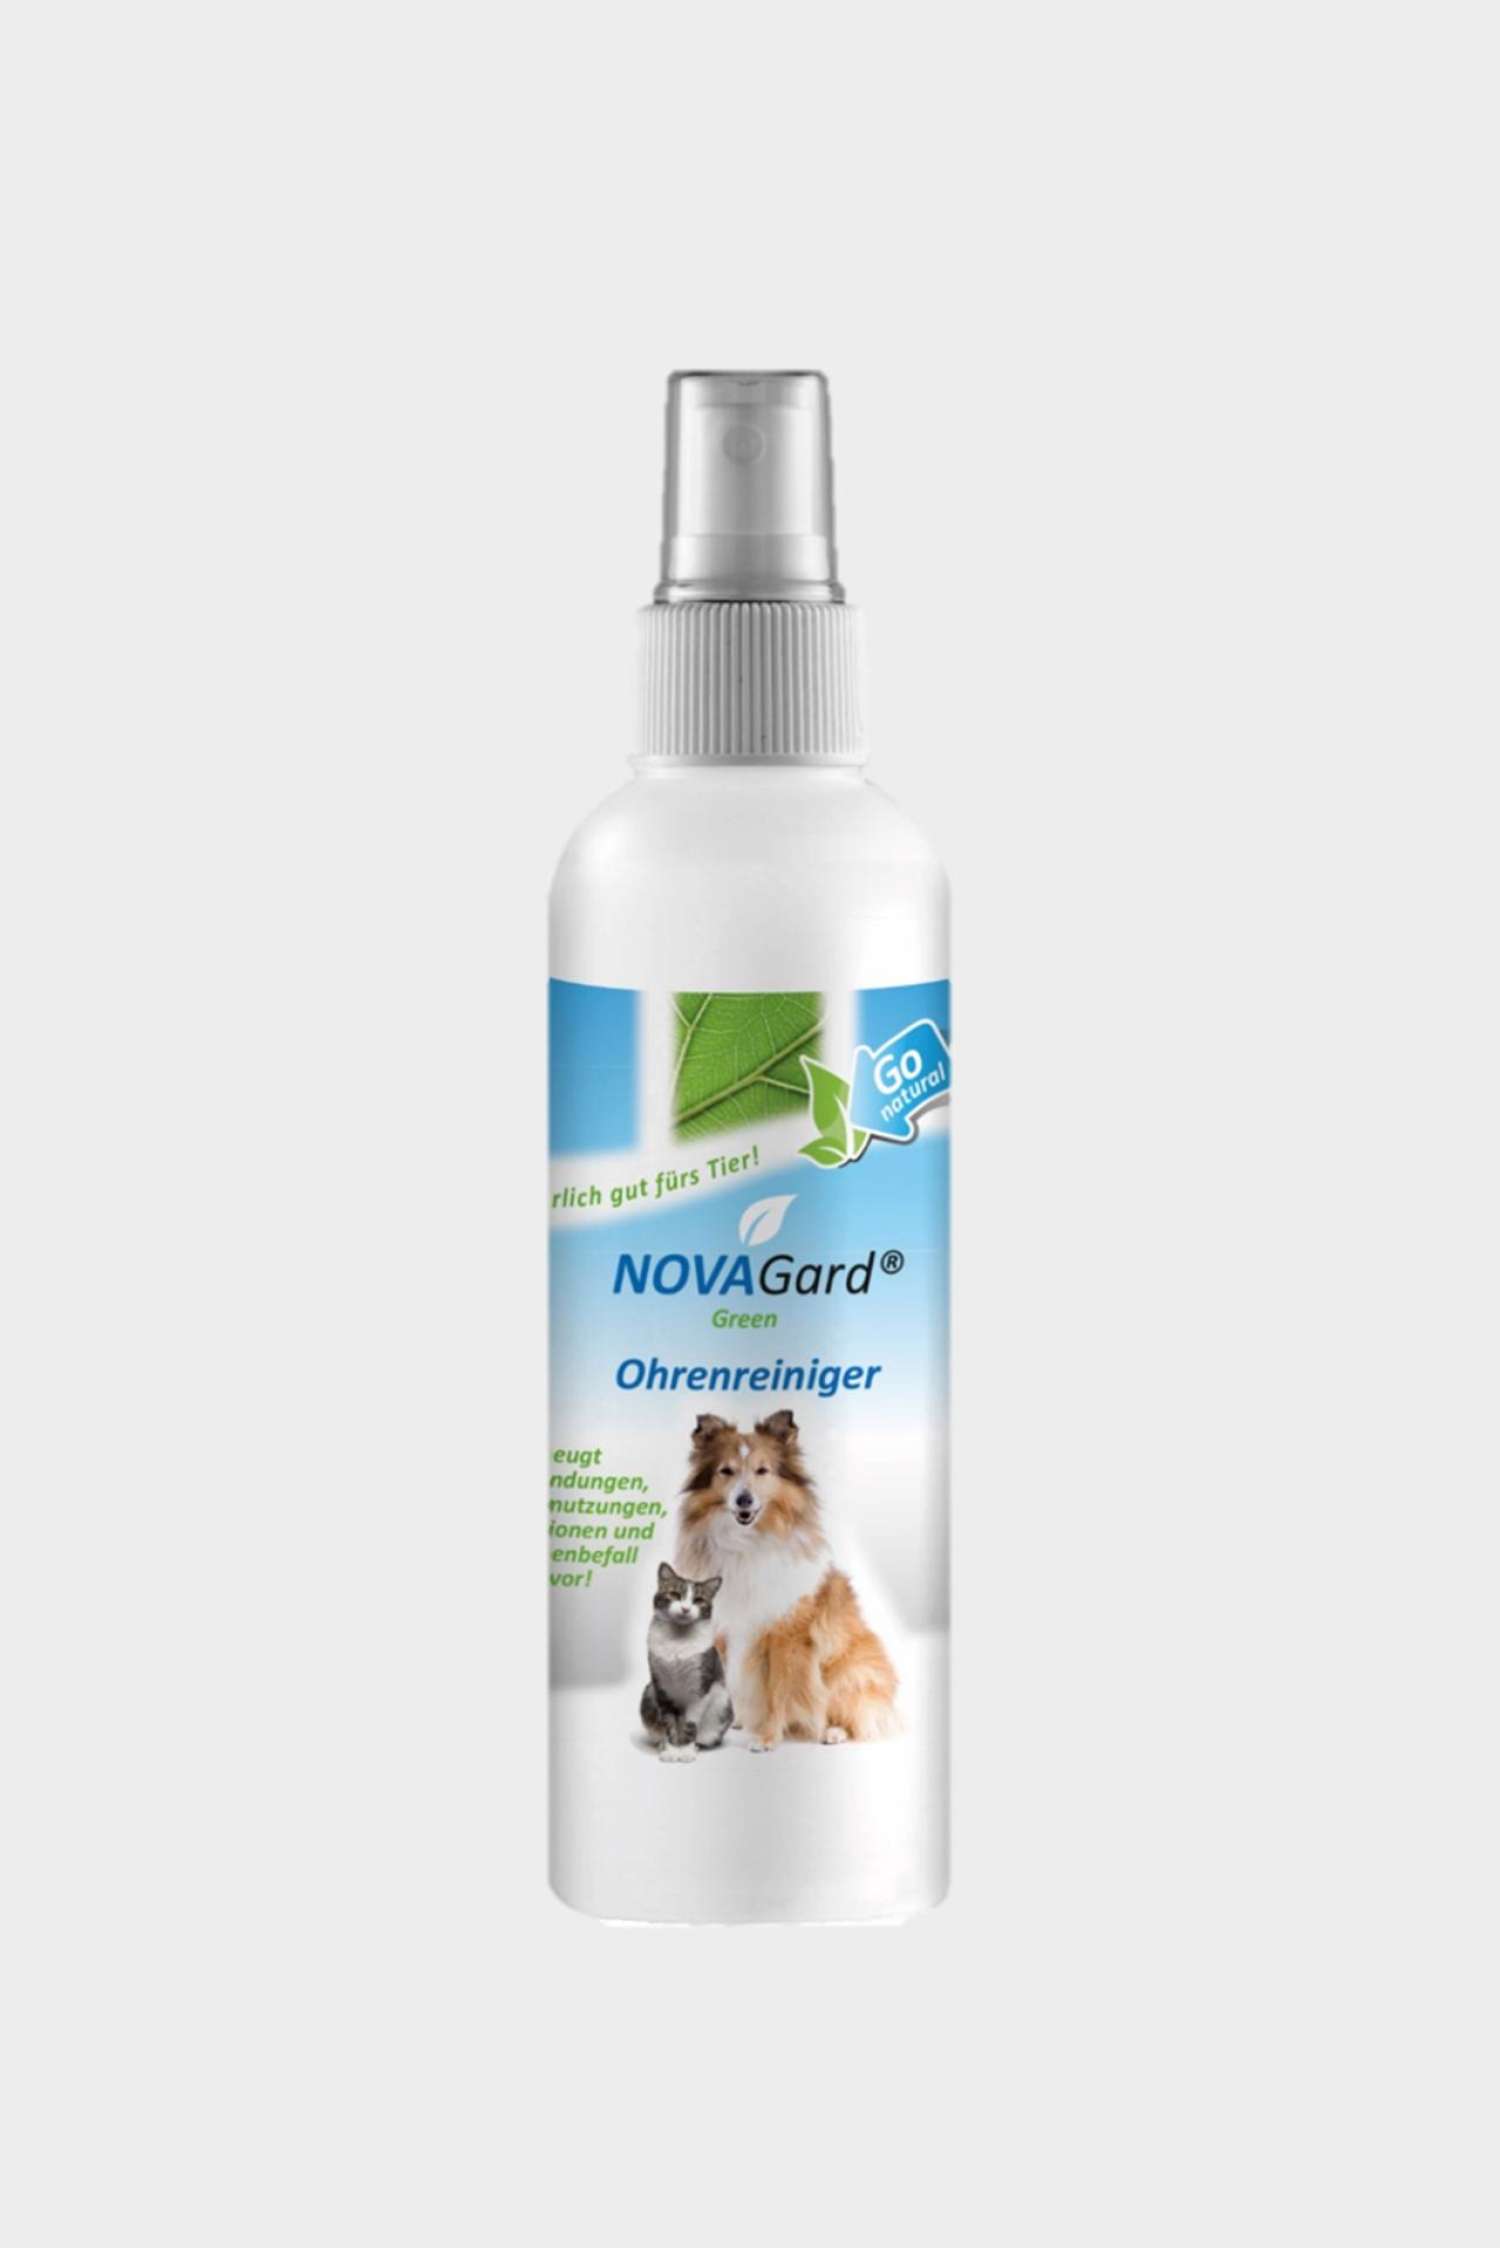 NovaGard Green ear cleaner for dogs & cats